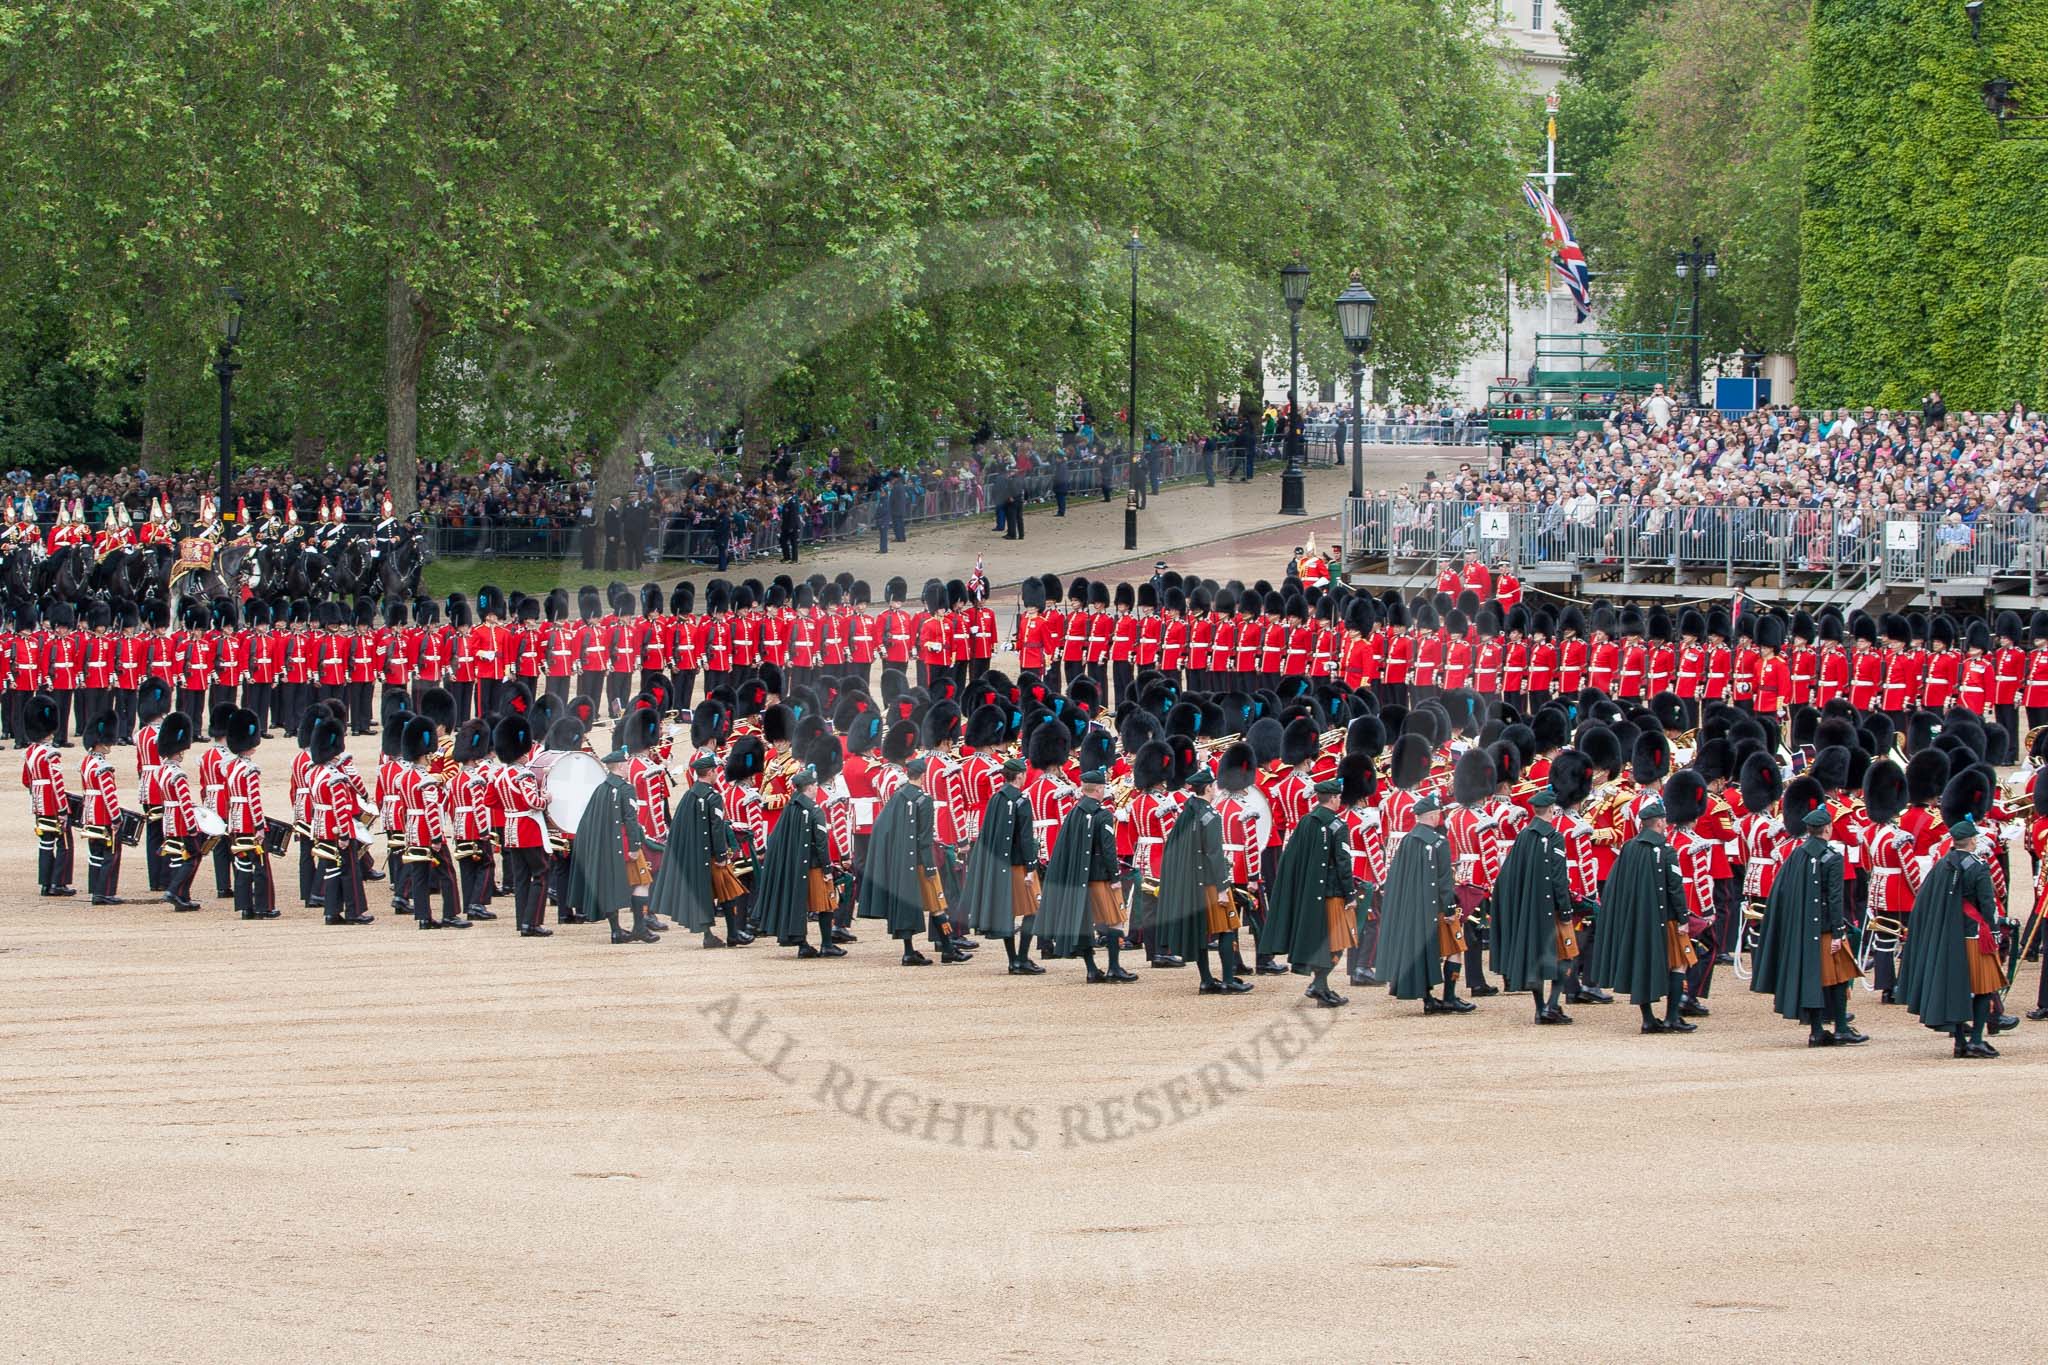 The Colonel's Review 2012: Massed Bands marching during the Massed Bands Troop..
Horse Guards Parade, Westminster,
London SW1,

United Kingdom,
on 09 June 2012 at 11:08, image #217